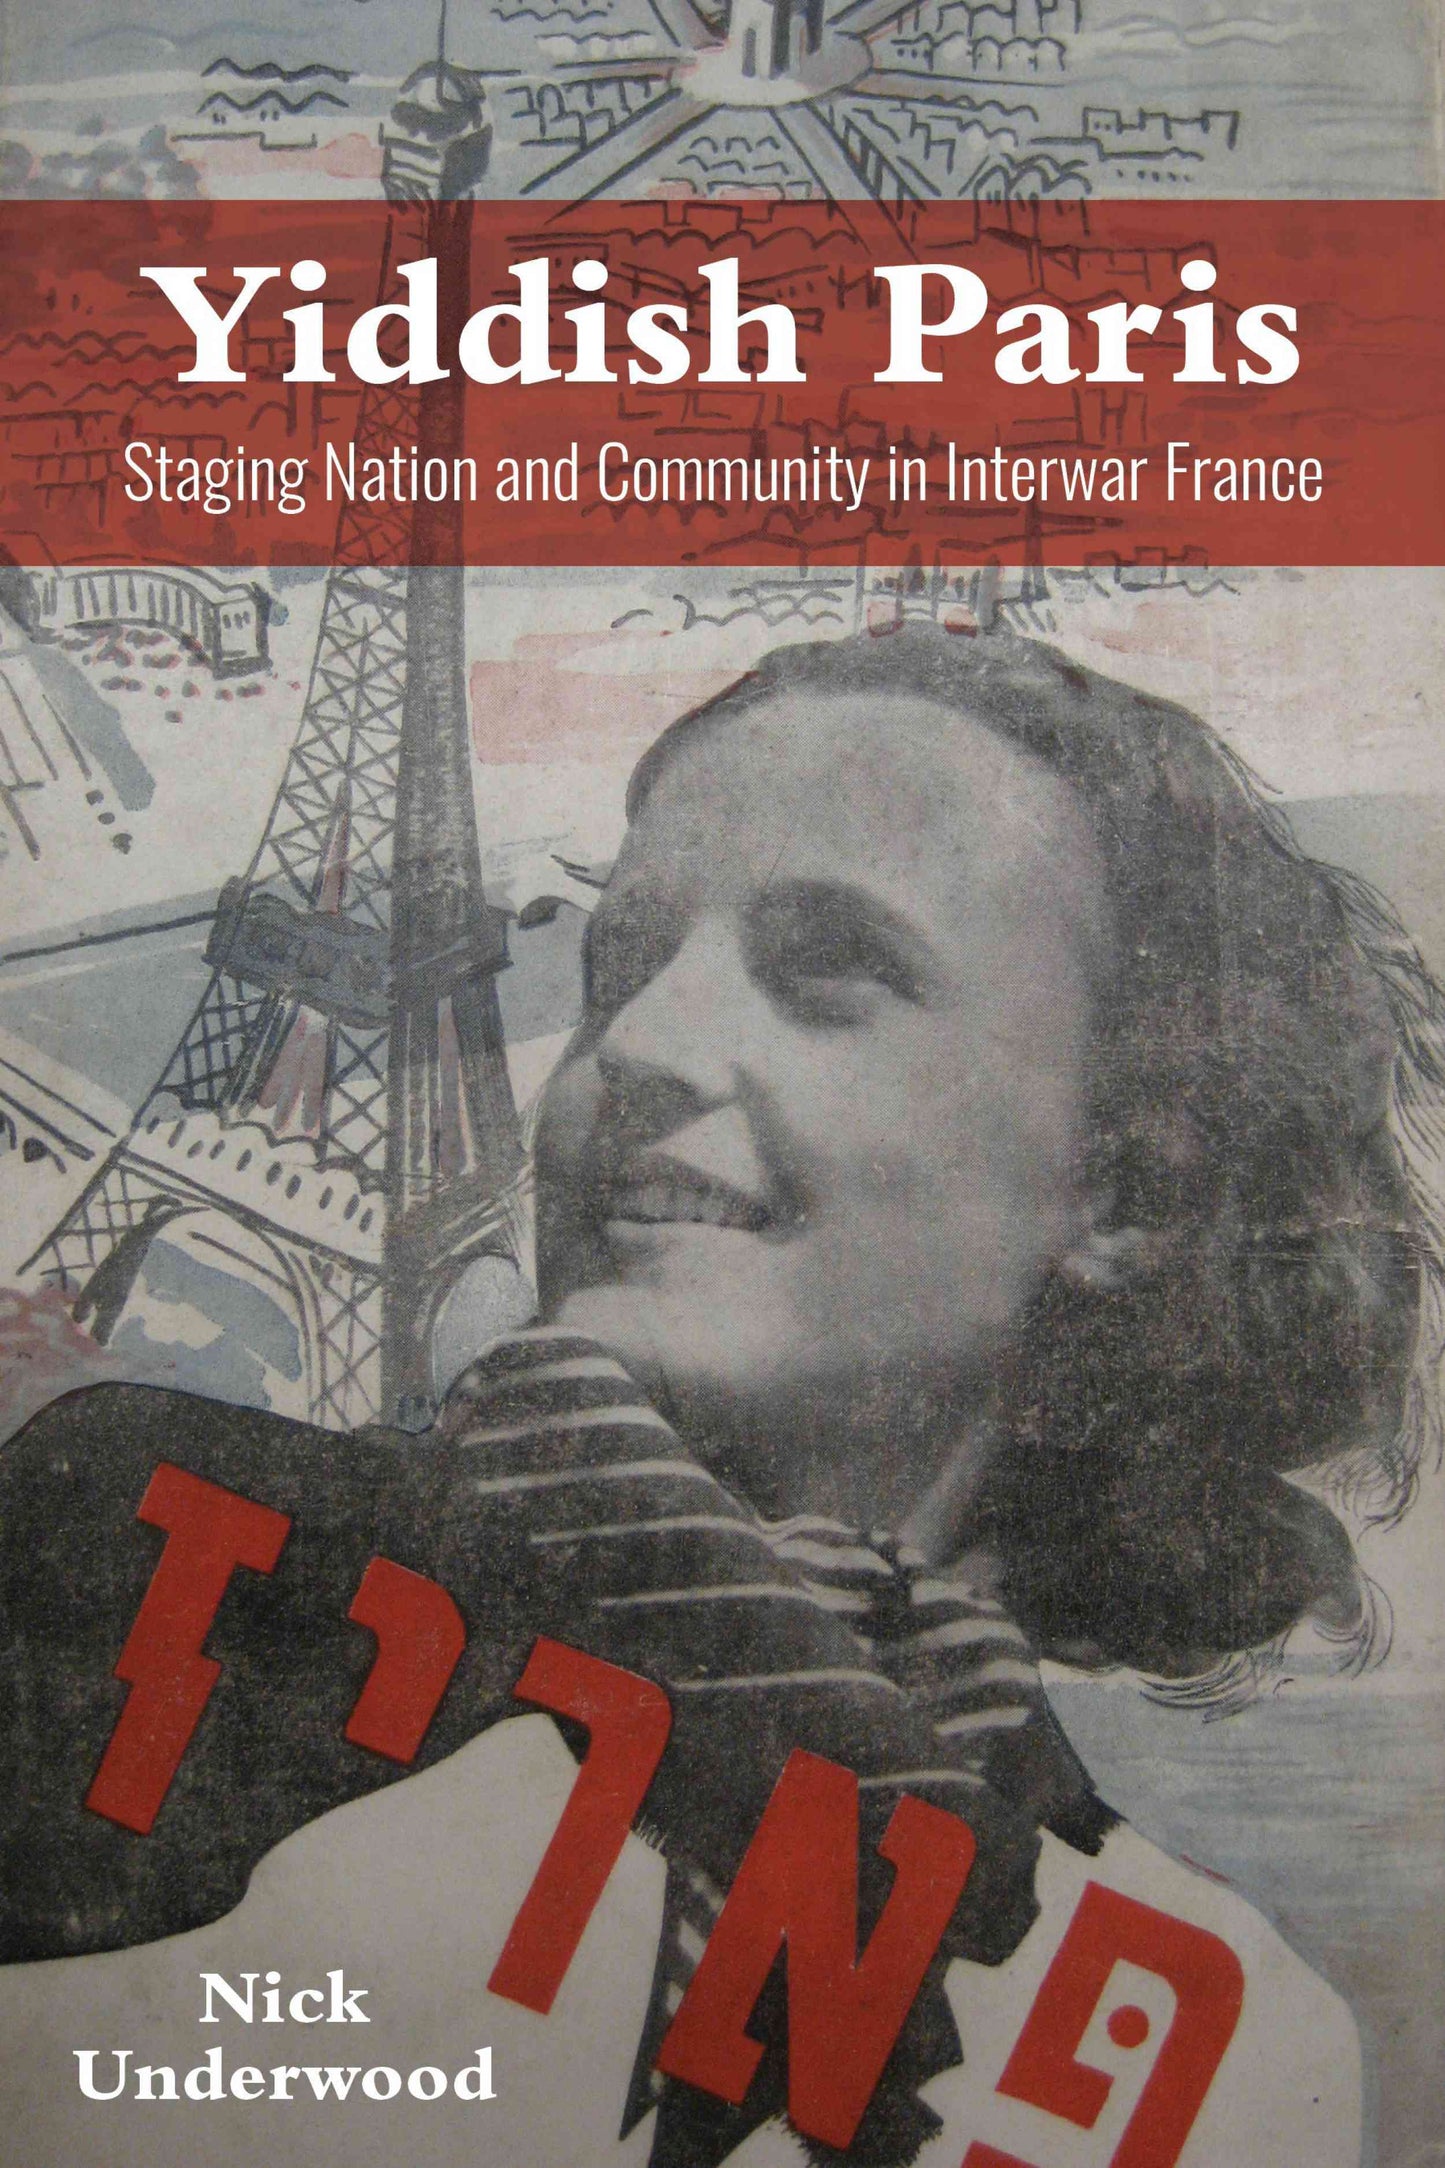 Yiddish Paris: Staging Nation and Community in Interwar France